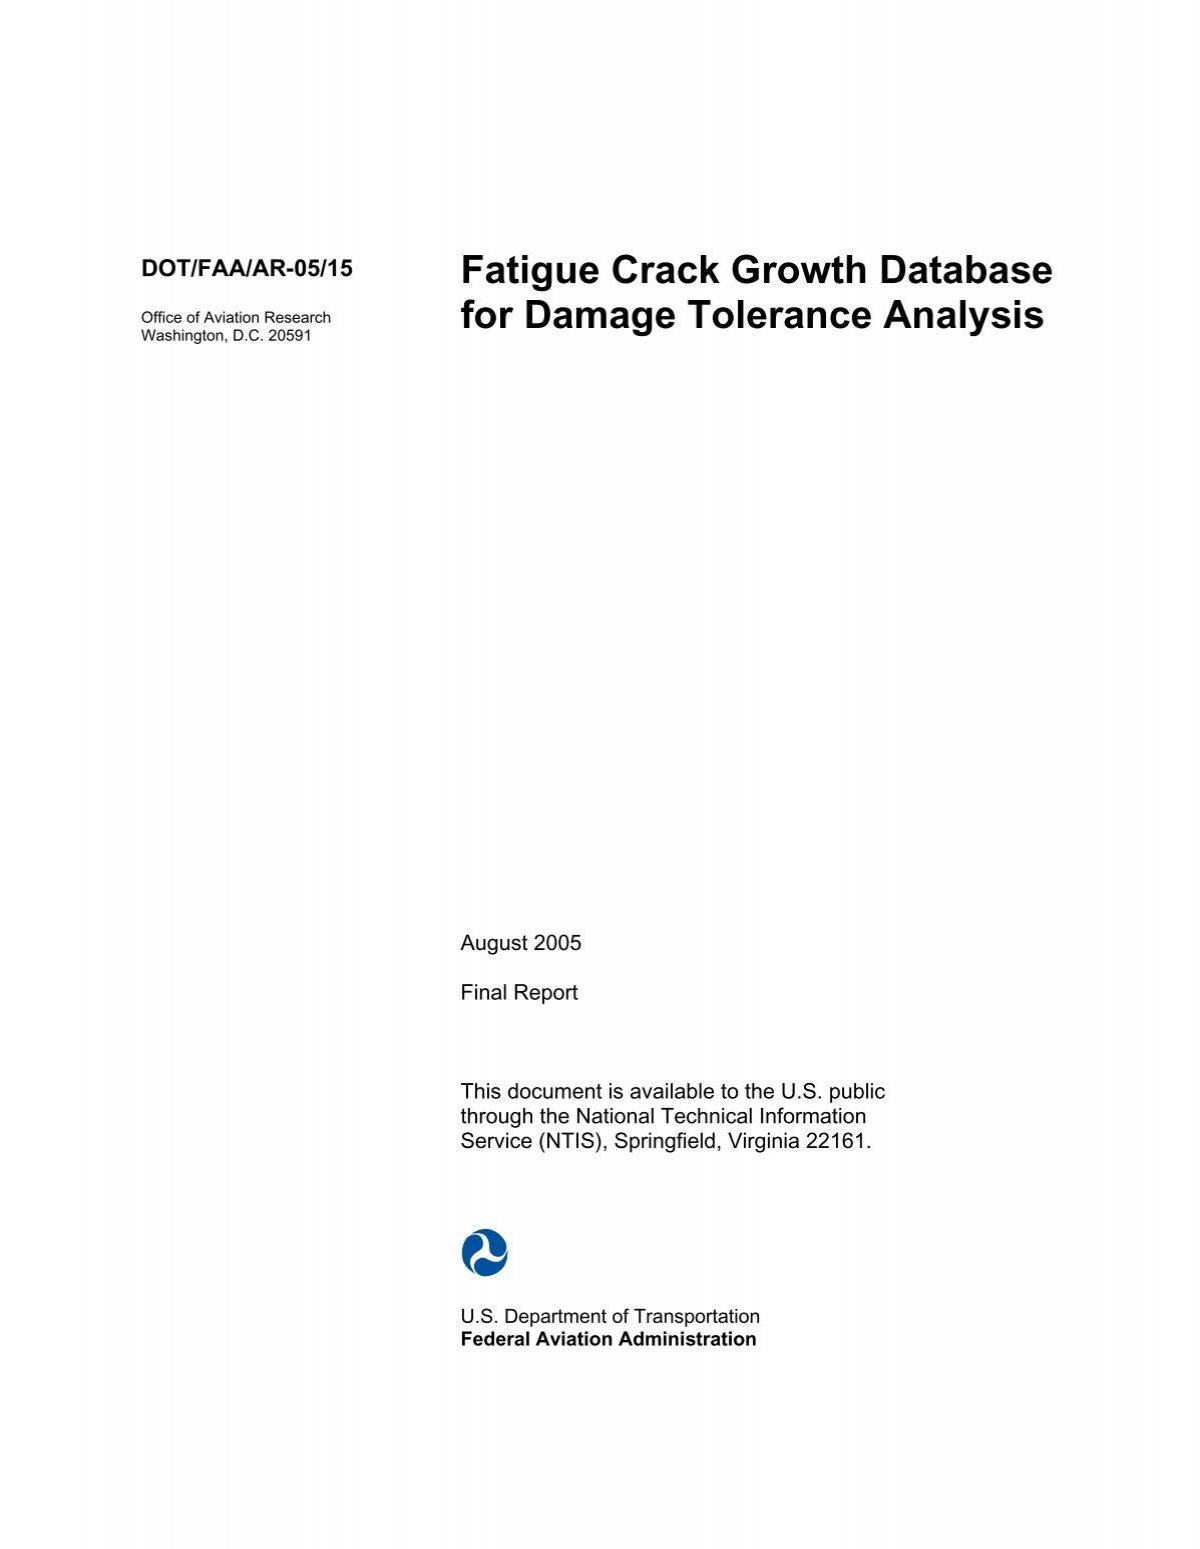 AFGROW (Air Force Growth) Fracture Mechanics and Fatigue Crack Growth  Analysis Software